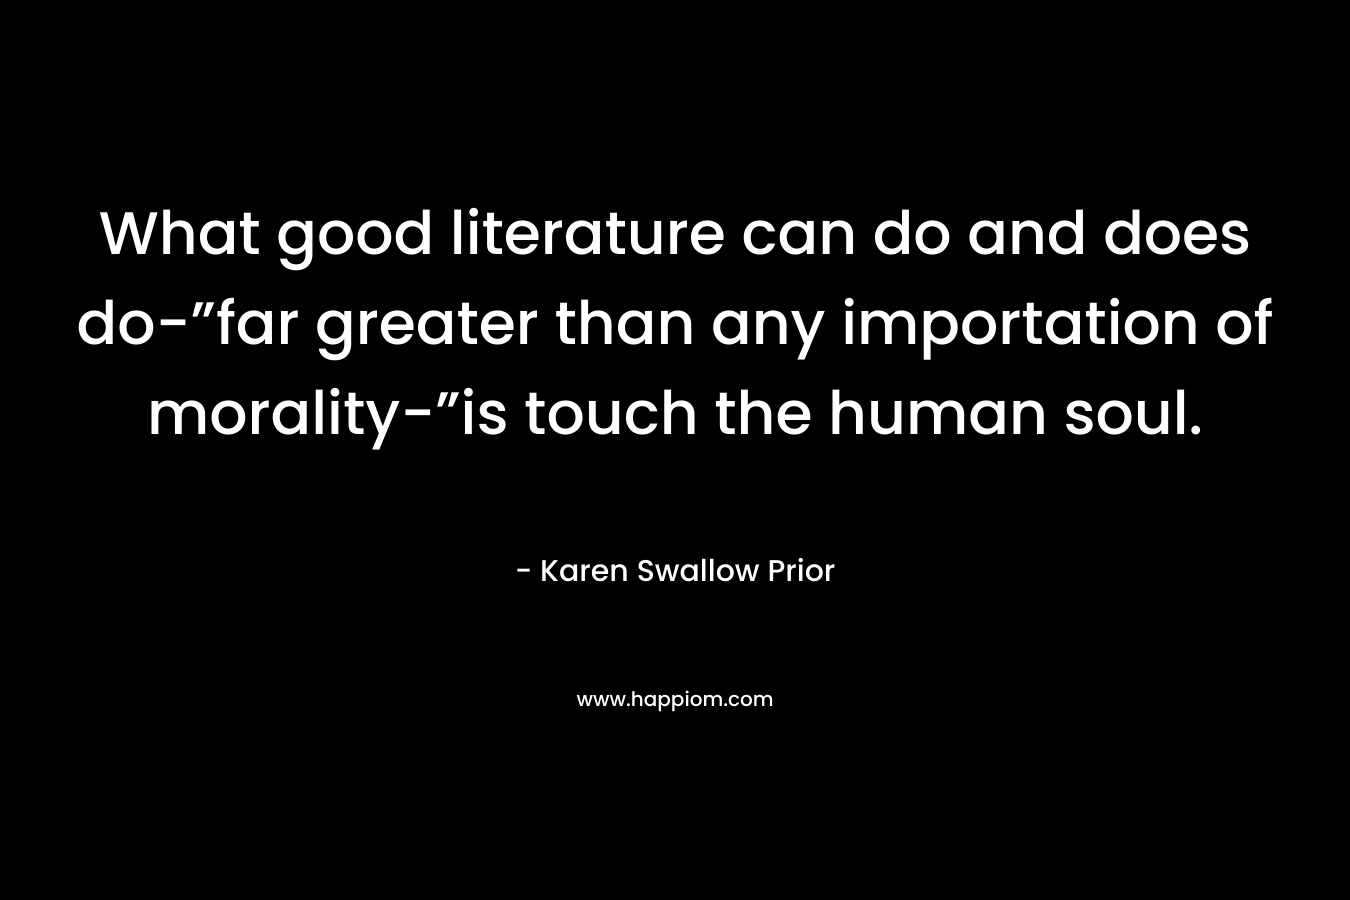 What good literature can do and does do-”far greater than any importation of morality-”is touch the human soul. – Karen Swallow Prior